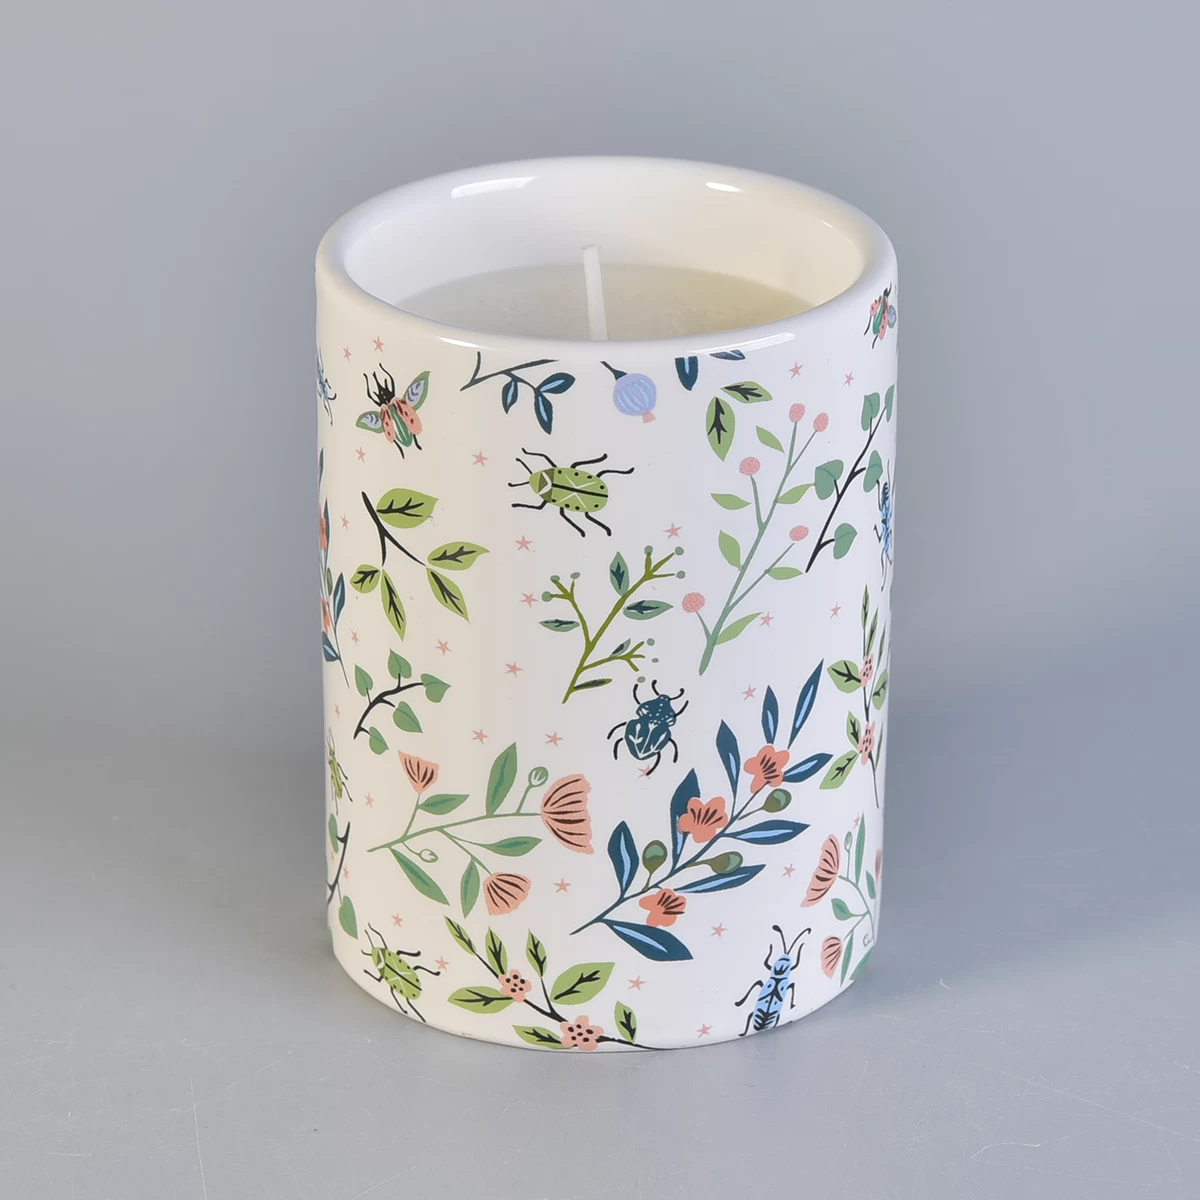 ceramic candle vessel with spring decal printing, cylinder decorative ceramic candle holders